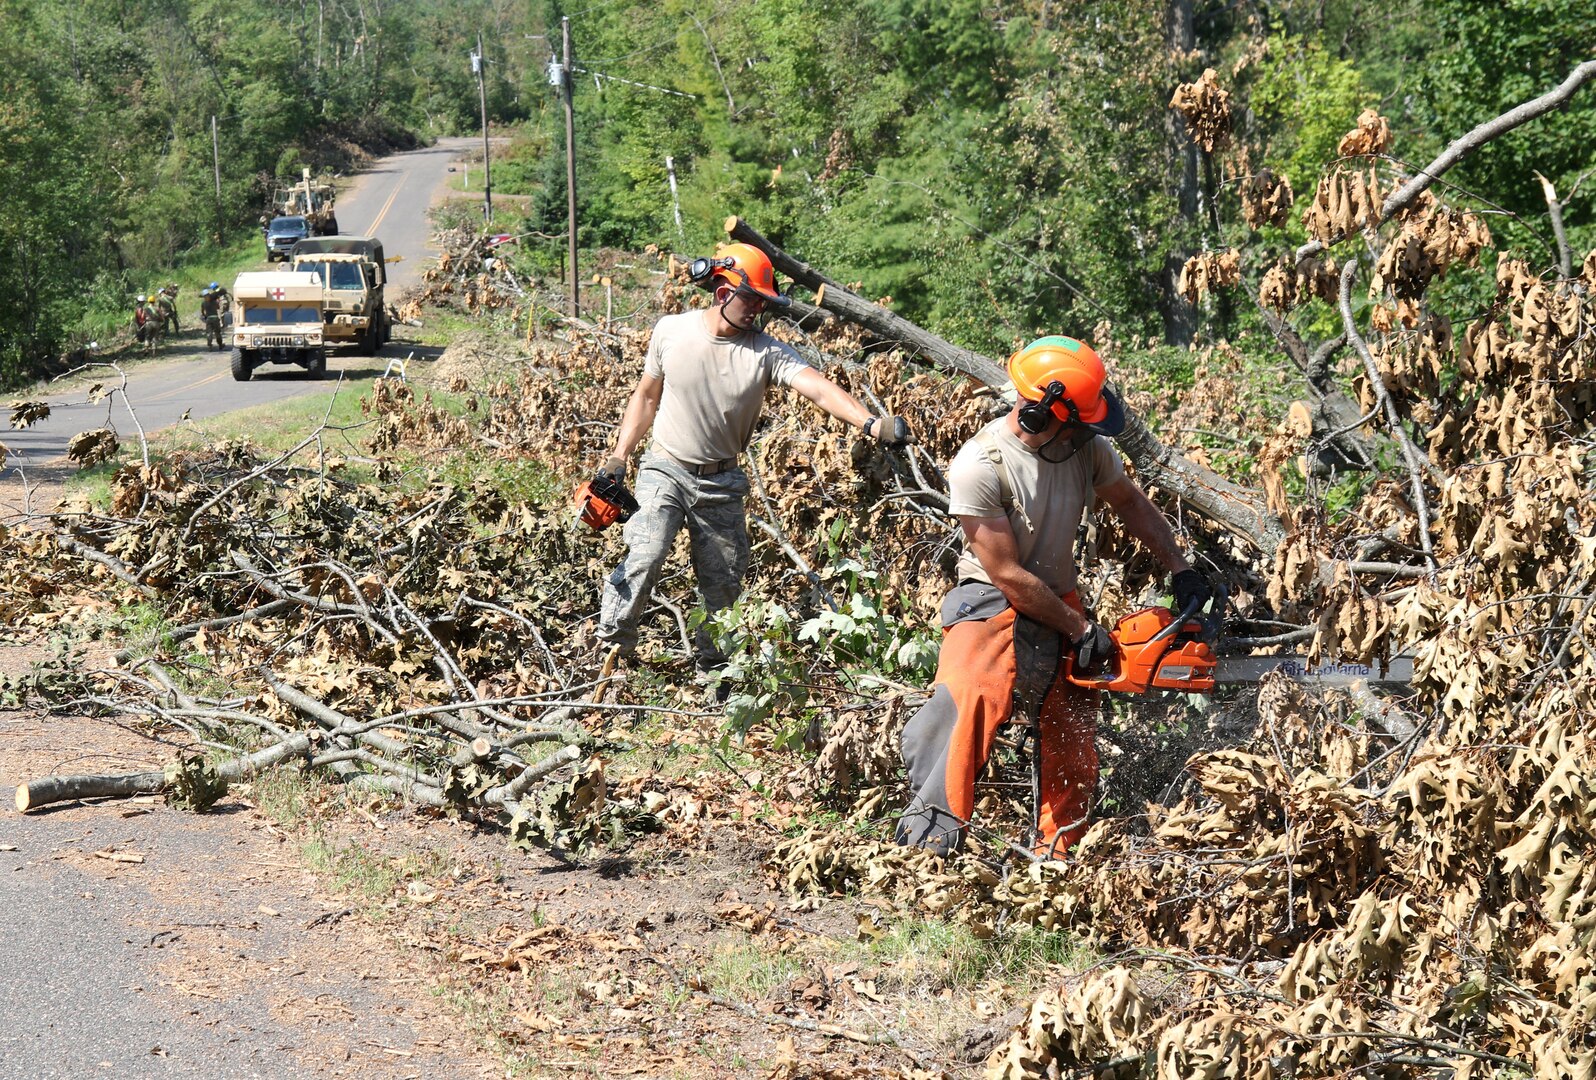 Staff Sgt. Cody Koeller, left, a part of the 115th Fighter Wing’s security forces and Tech. Sgt. Andrew Melton, a munitions technician with the 115th, right, cut through dense debris along the roadways near Loon Lake in Barron County, Wis., Aug. 3, 2019, as part of the continued recovery efforts in Polk and Barron Counties. Approximately 100 Soldiers and Airmen from the Wisconsin Army and Air National Guard remain on duty to assist civil authorities with damage assessment and debris clearance following the severe weather that struck Northern Wisconsin July 19-20.